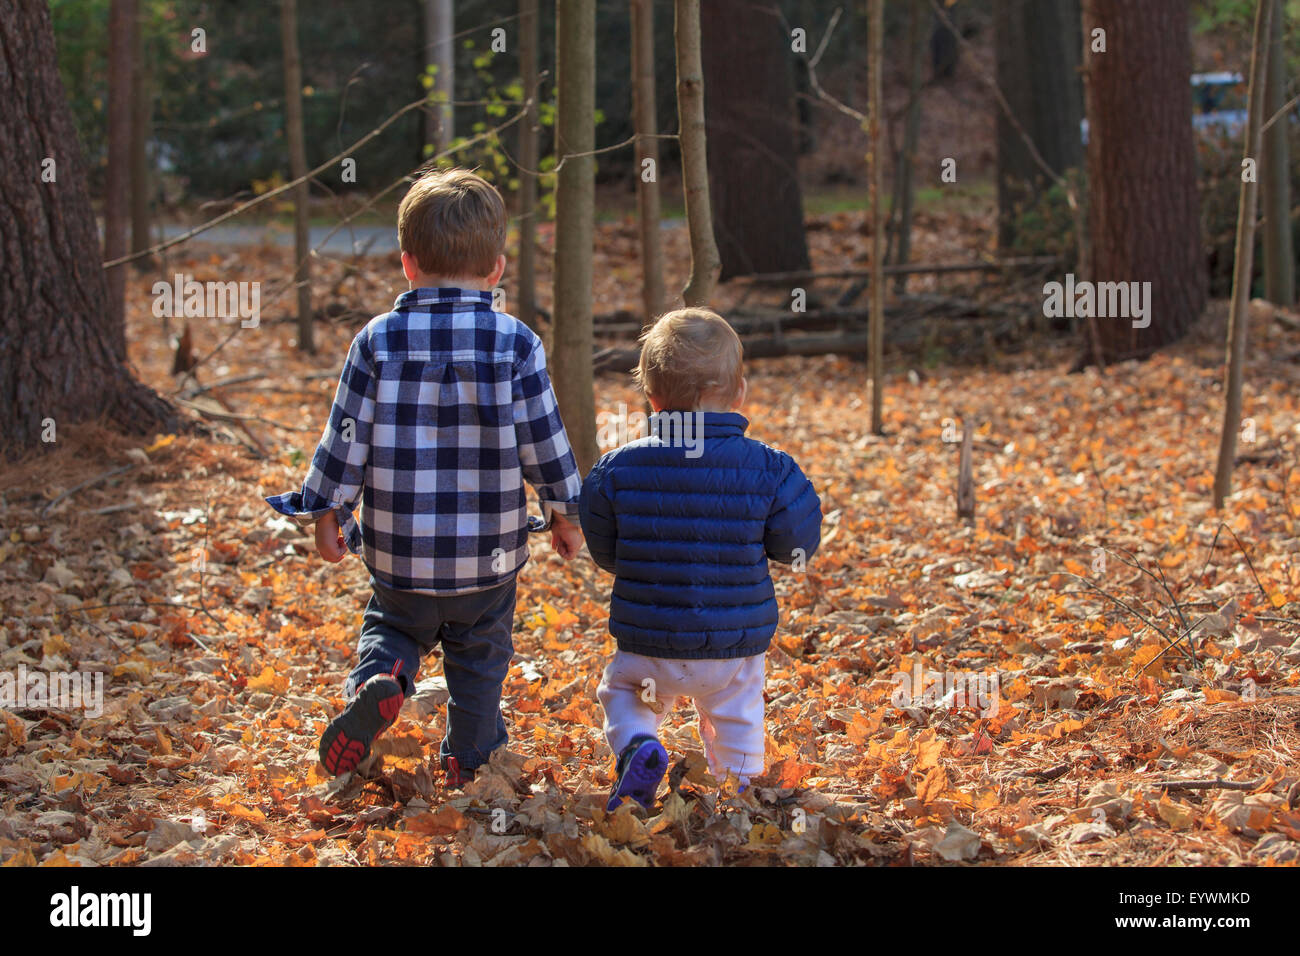 Rear view of a boy and his baby sister walking on fallen leaves Stock Photo